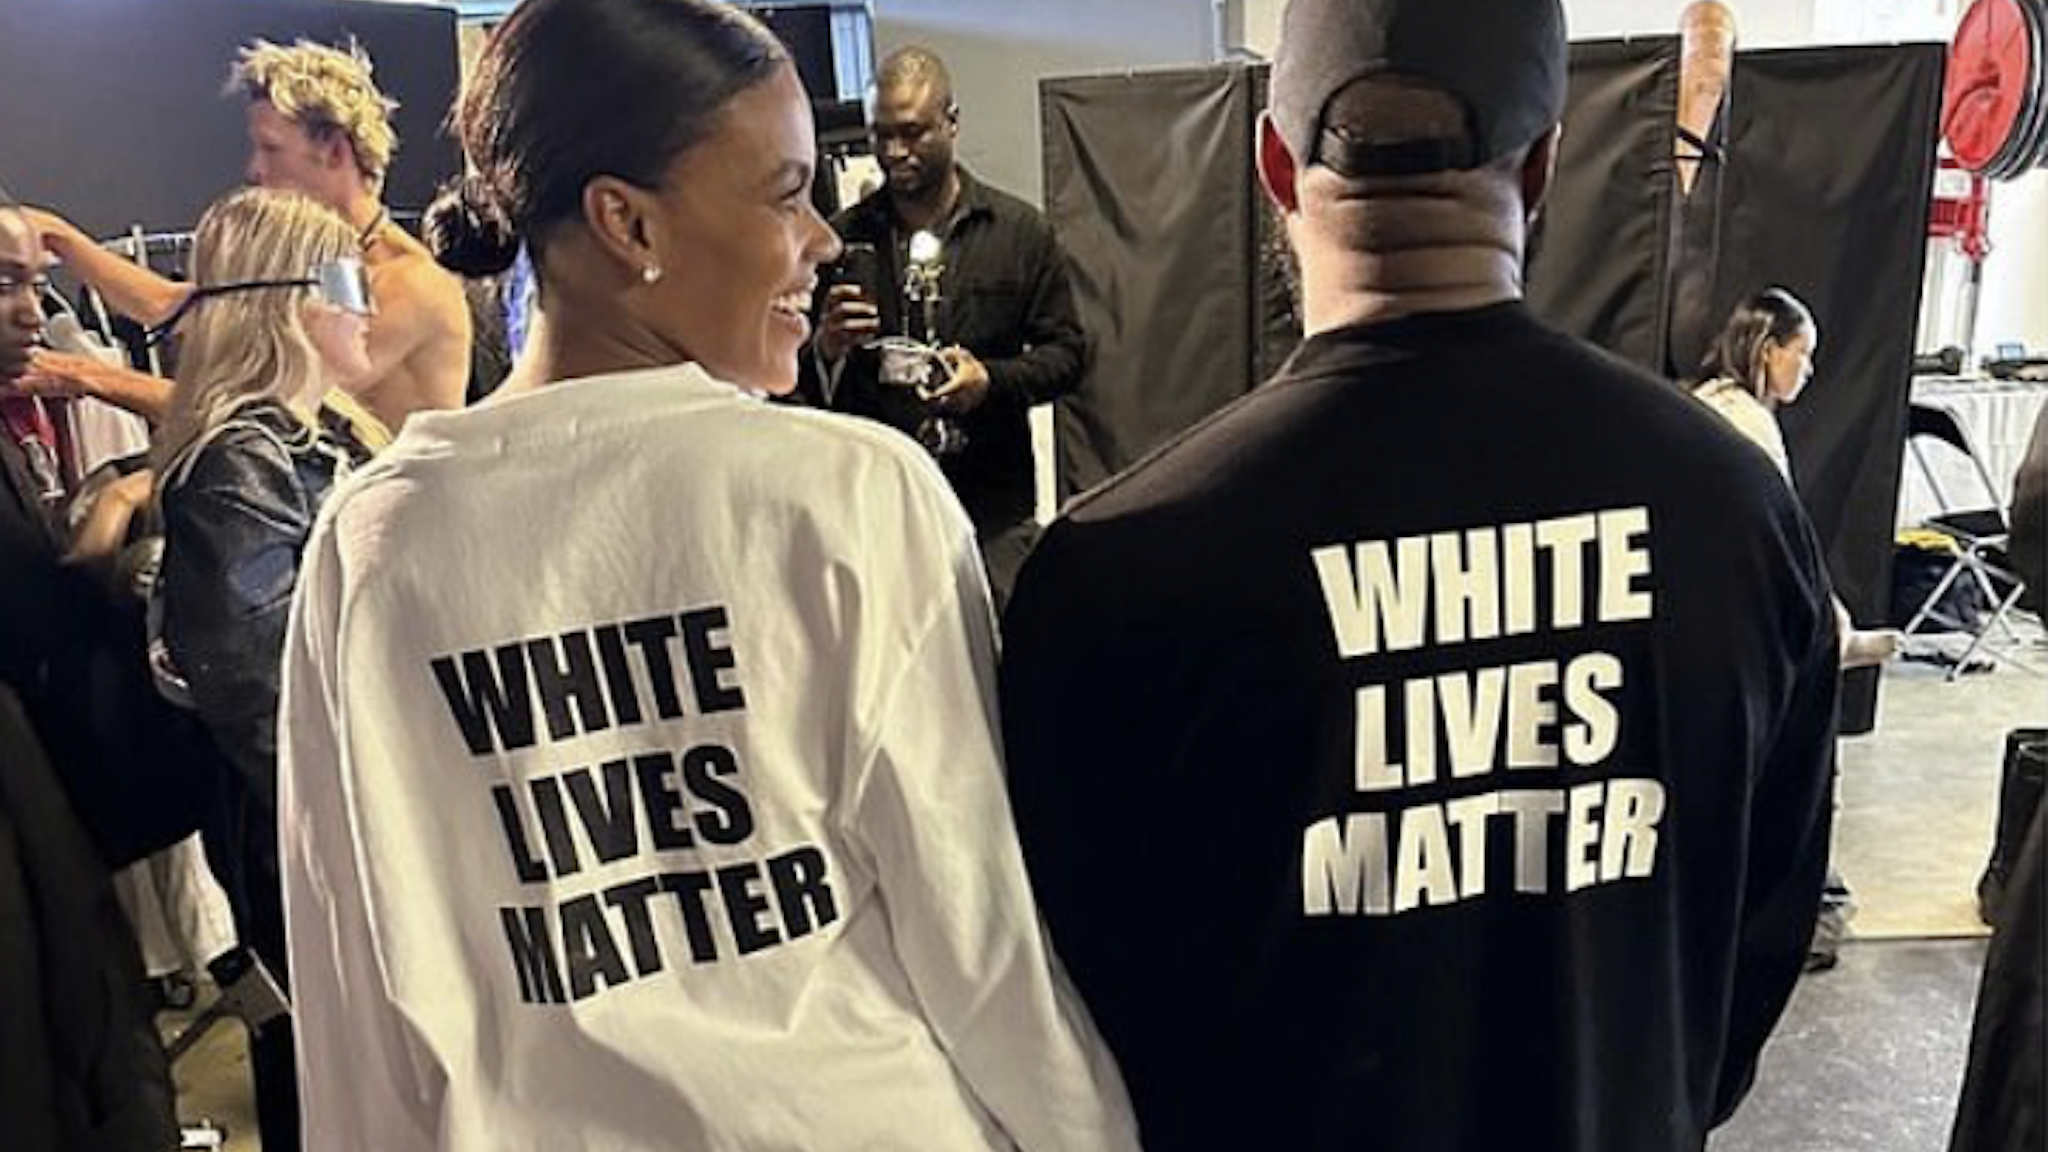 Candace Owens and Kanye West turned heads in matching "White Lives Matter" T-shirts at a Paris fashion show Monday.